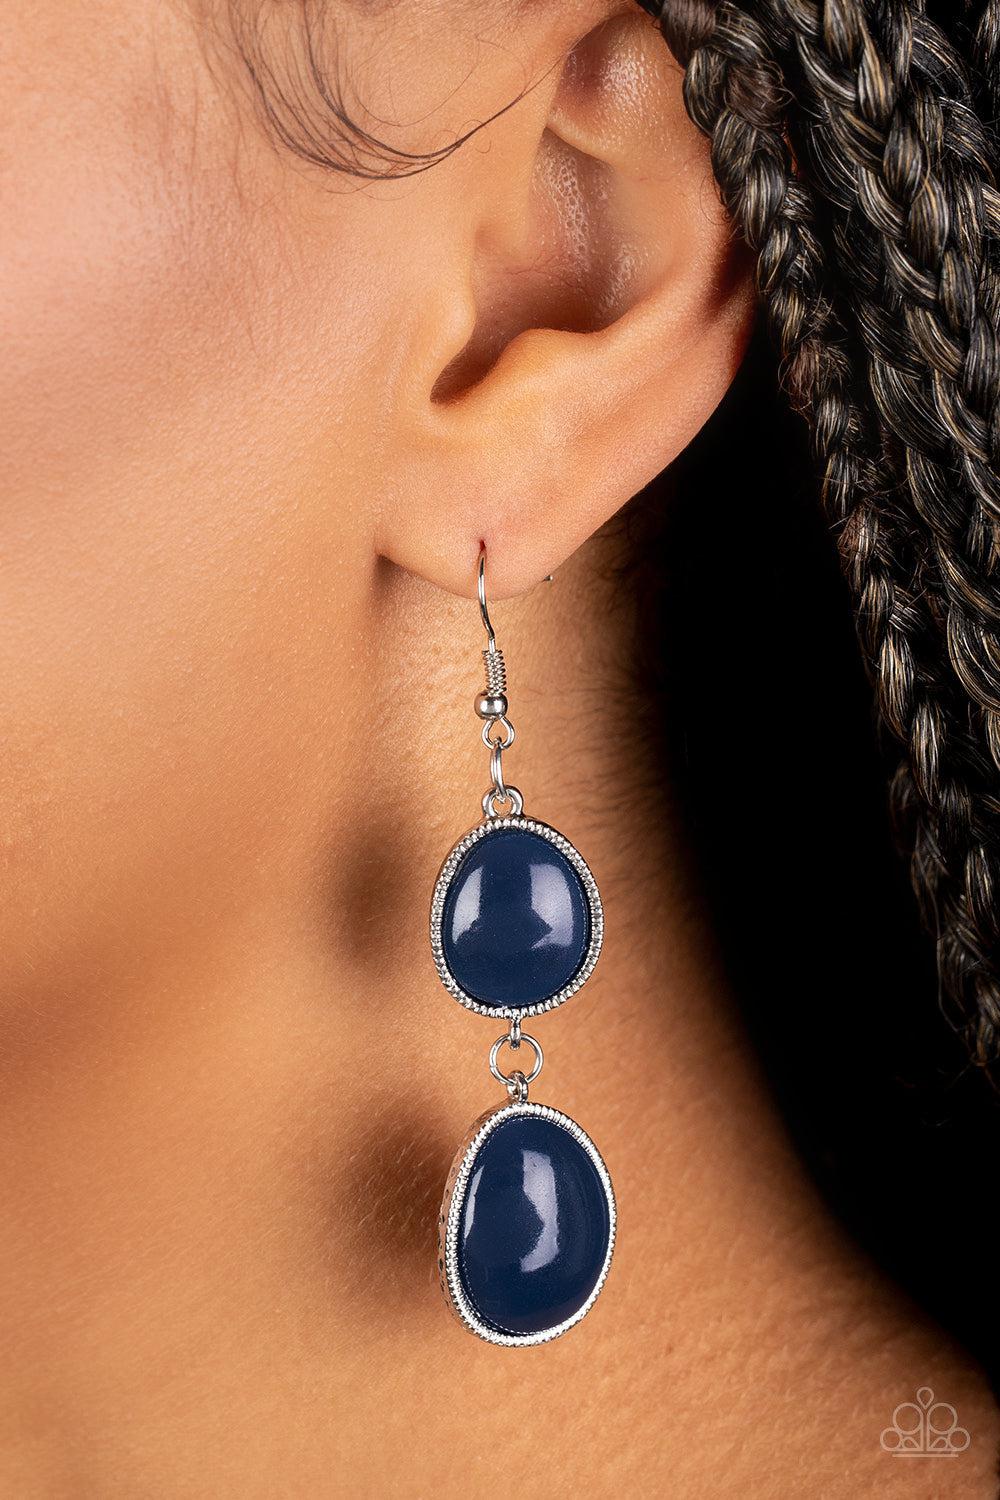 Mediterranean Myth Navy Blue Earrings - Paparazzi Accessories- lightbox - CarasShop.com - $5 Jewelry by Cara Jewels